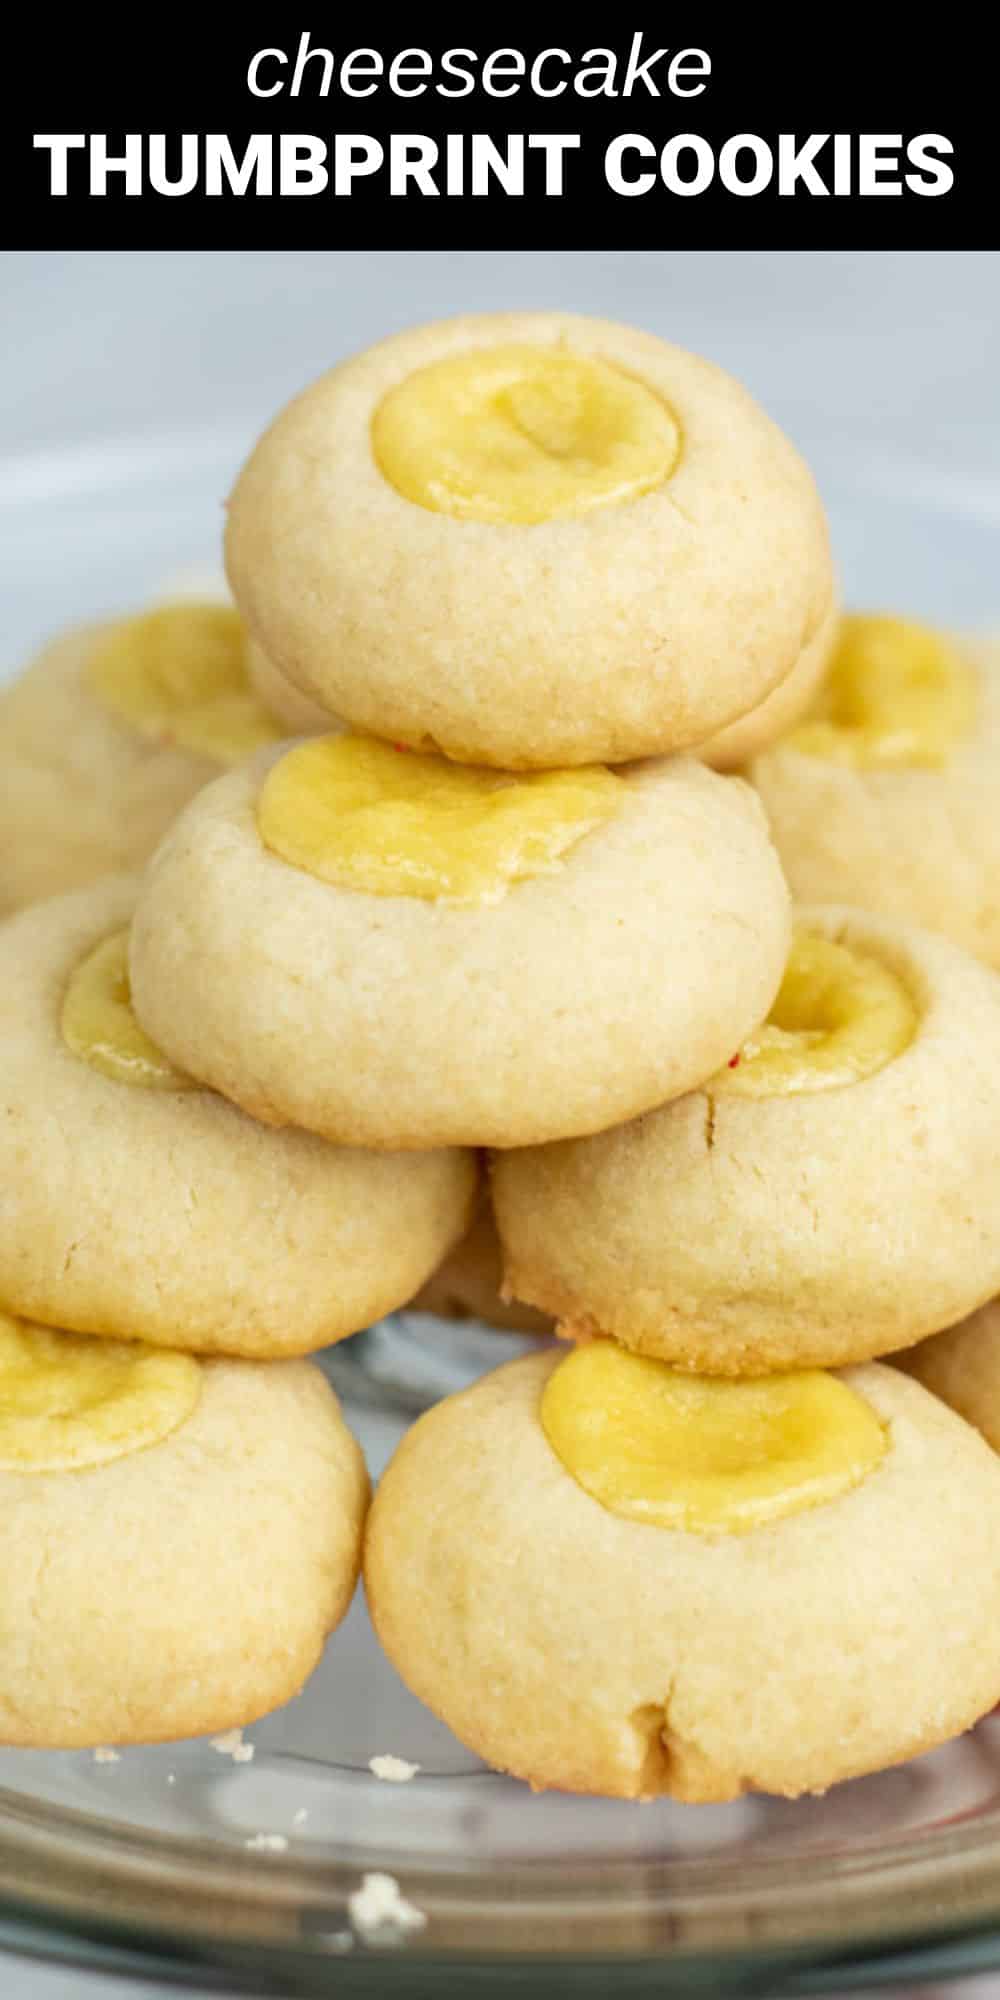 These cheesecake thumbprint cookies have everything you love about a sugar cookie and a cheesecake in one delicious dessert. A lightly sweet and buttery cookie forms the base for this treat and acts almost like a crust that holds the sweet and creamy cheesecake filling.